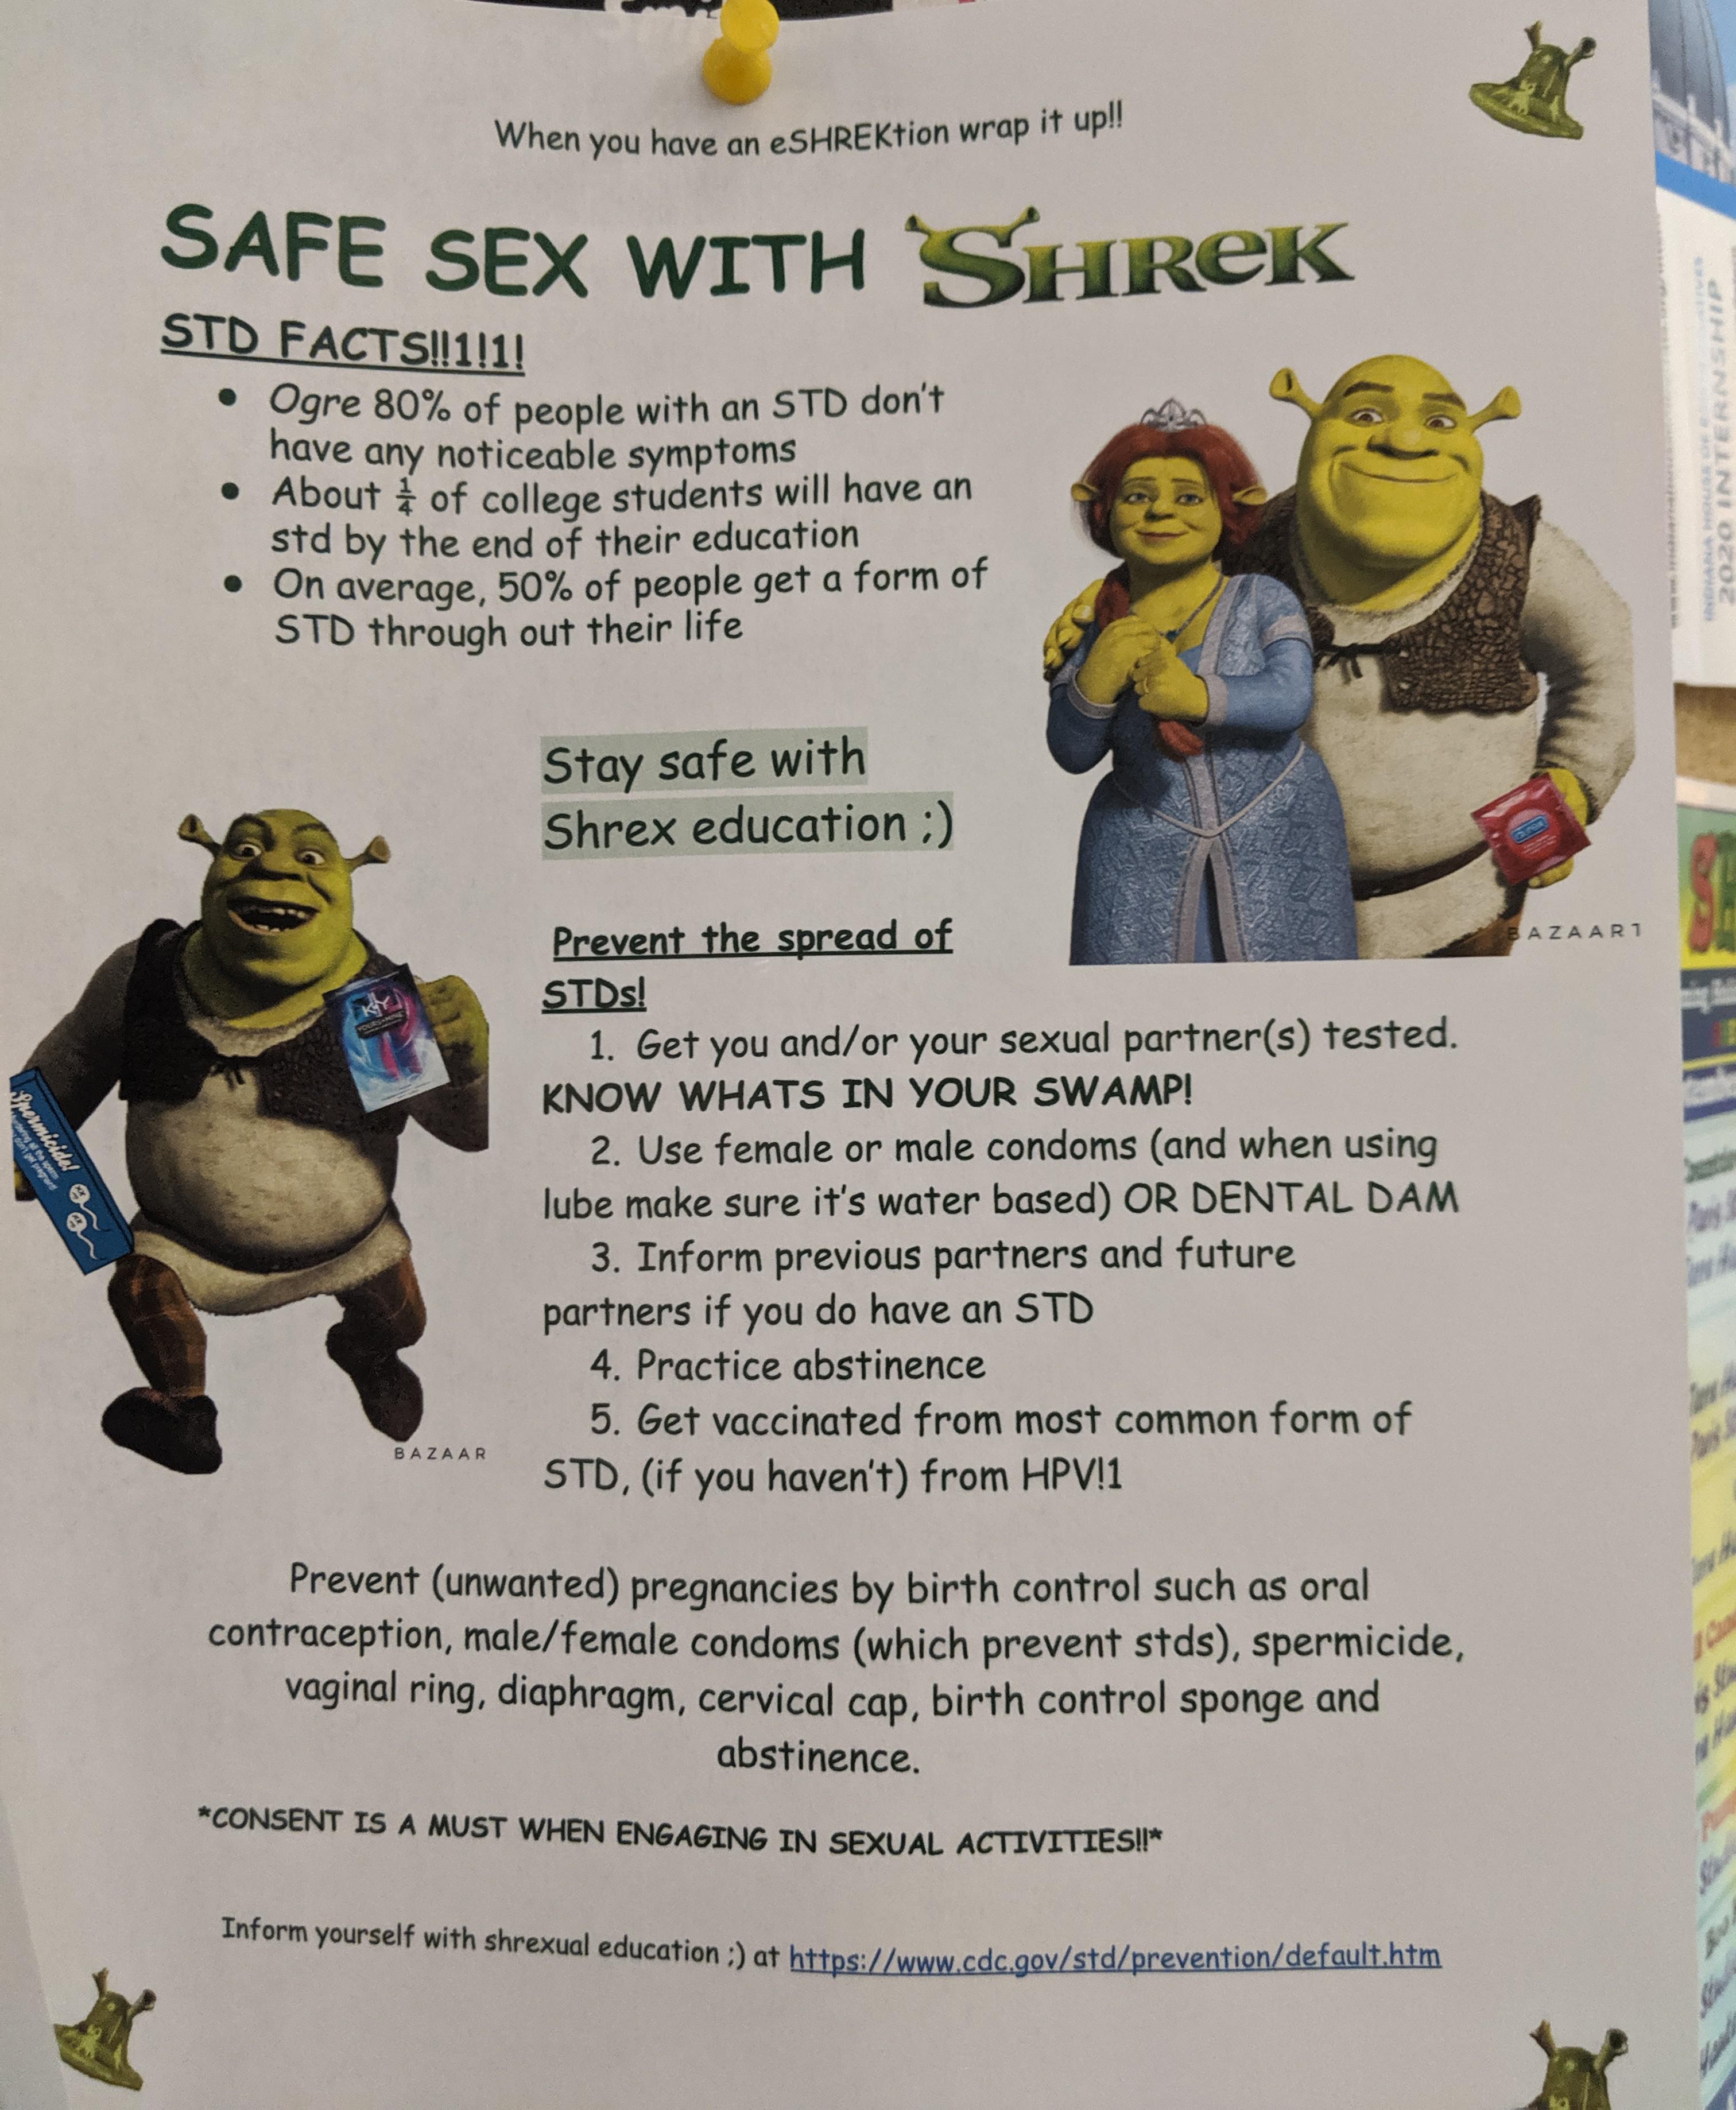 animal - When you have on Shekh wrap it up Safe Sex With Shrek Std Facts . Ogre 80% of people with an Std don't have any noticeable symptoms About of college students will have on std by the end of their education . On average, 50% of people get a form of